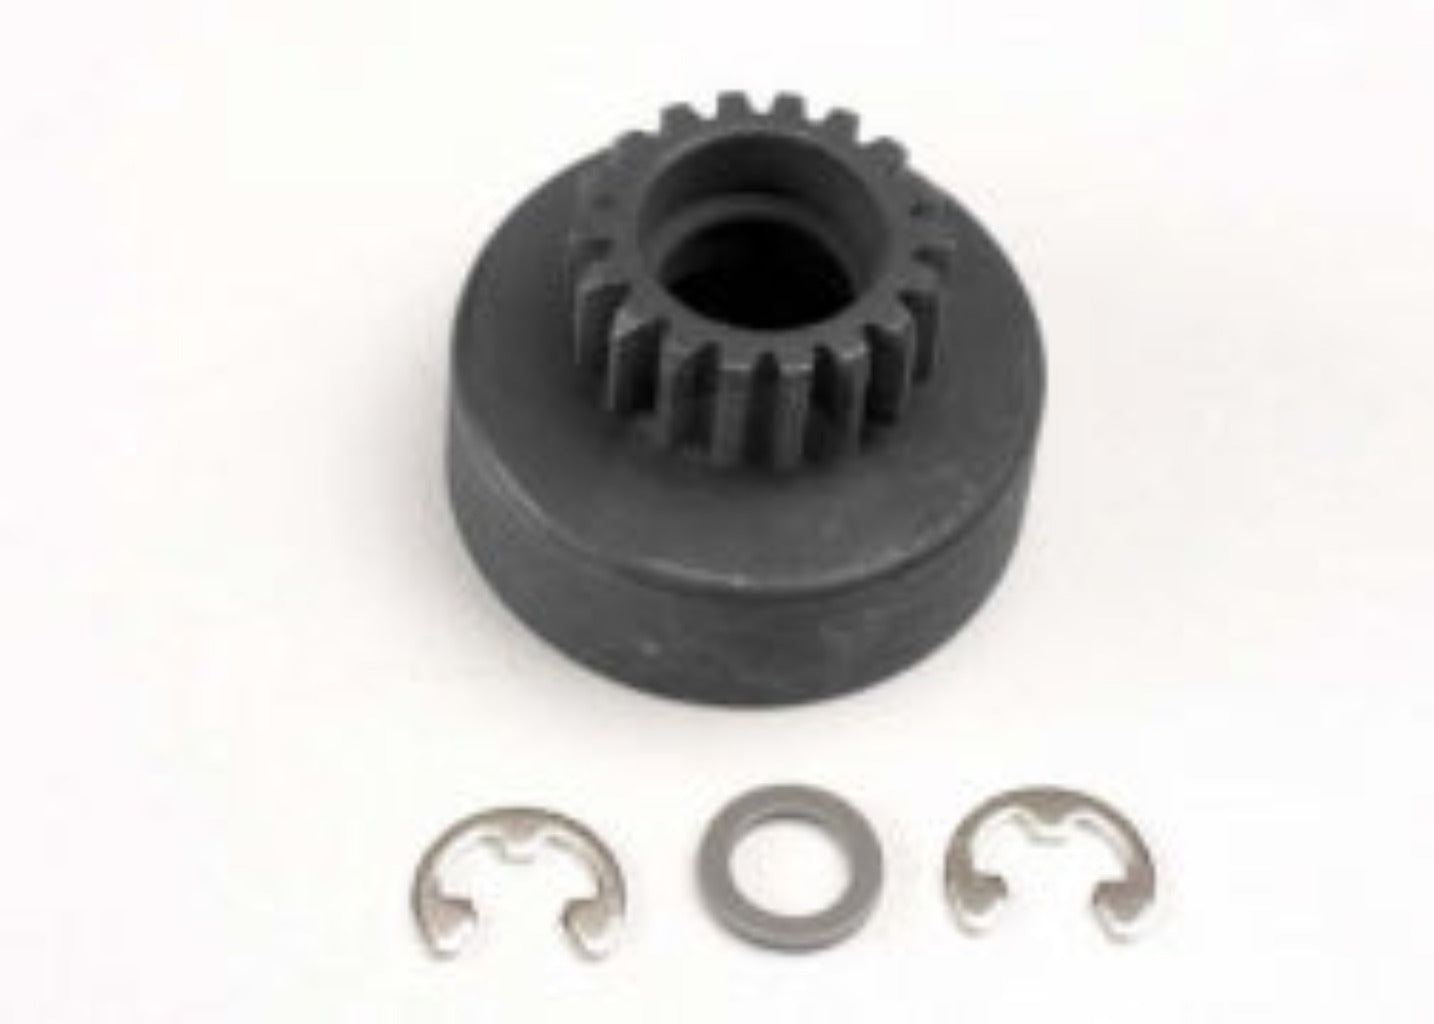 4118 Clutch bell, (18-tooth)/ 5x8x0.5mm fiber washer (2)/ 5mm E-clip (requires #4609 - ball bearings, 5x10x4mm (2))